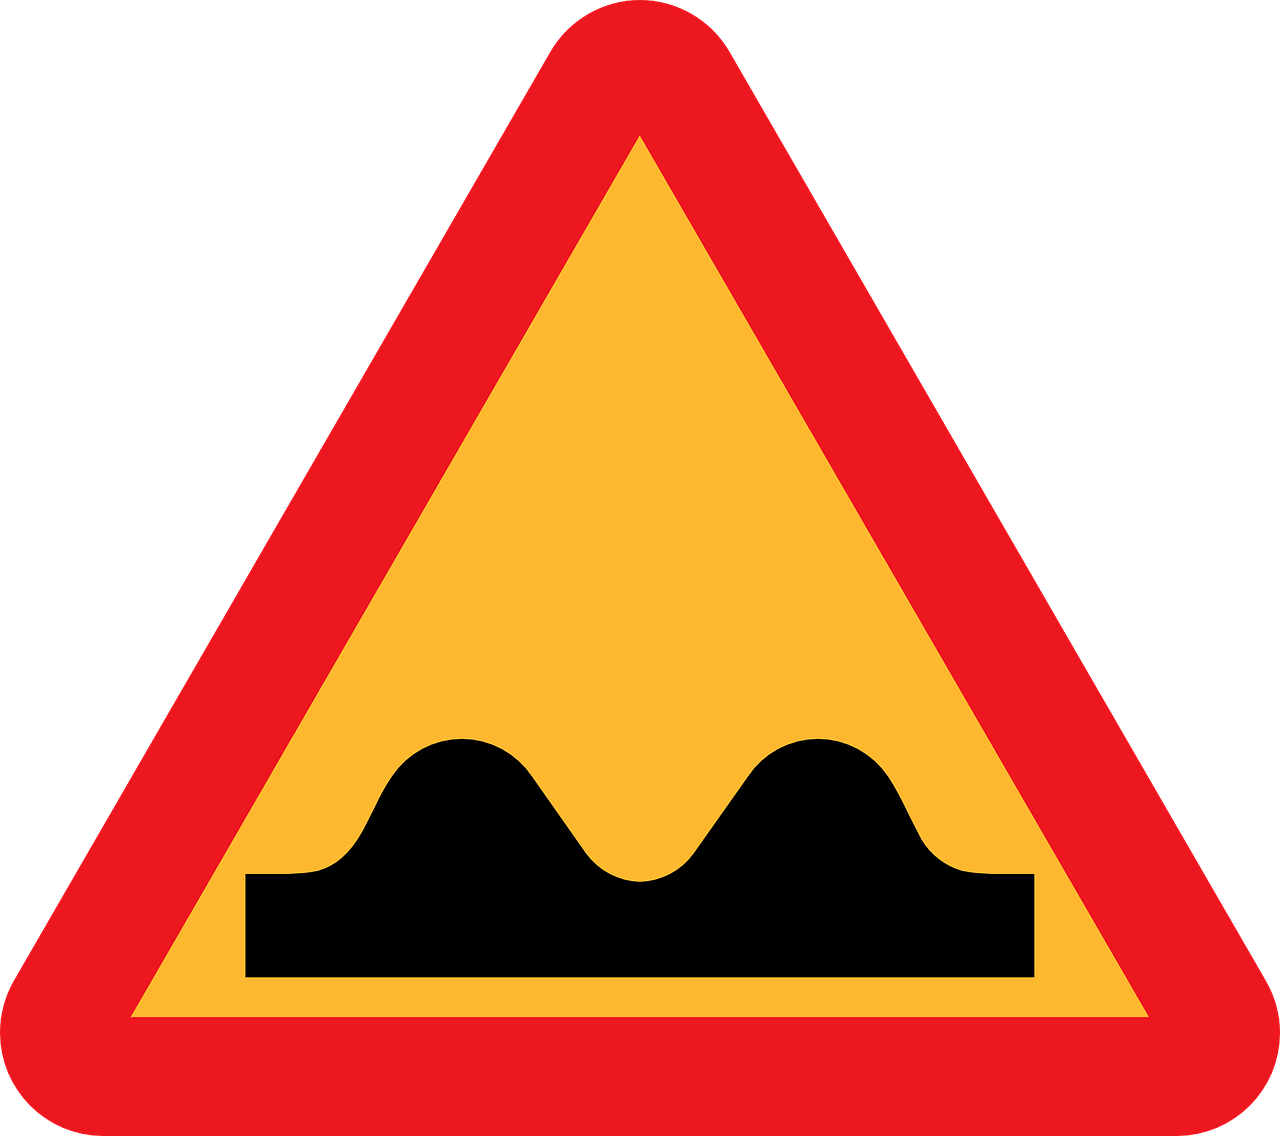 caution-sign-30912_1280.png